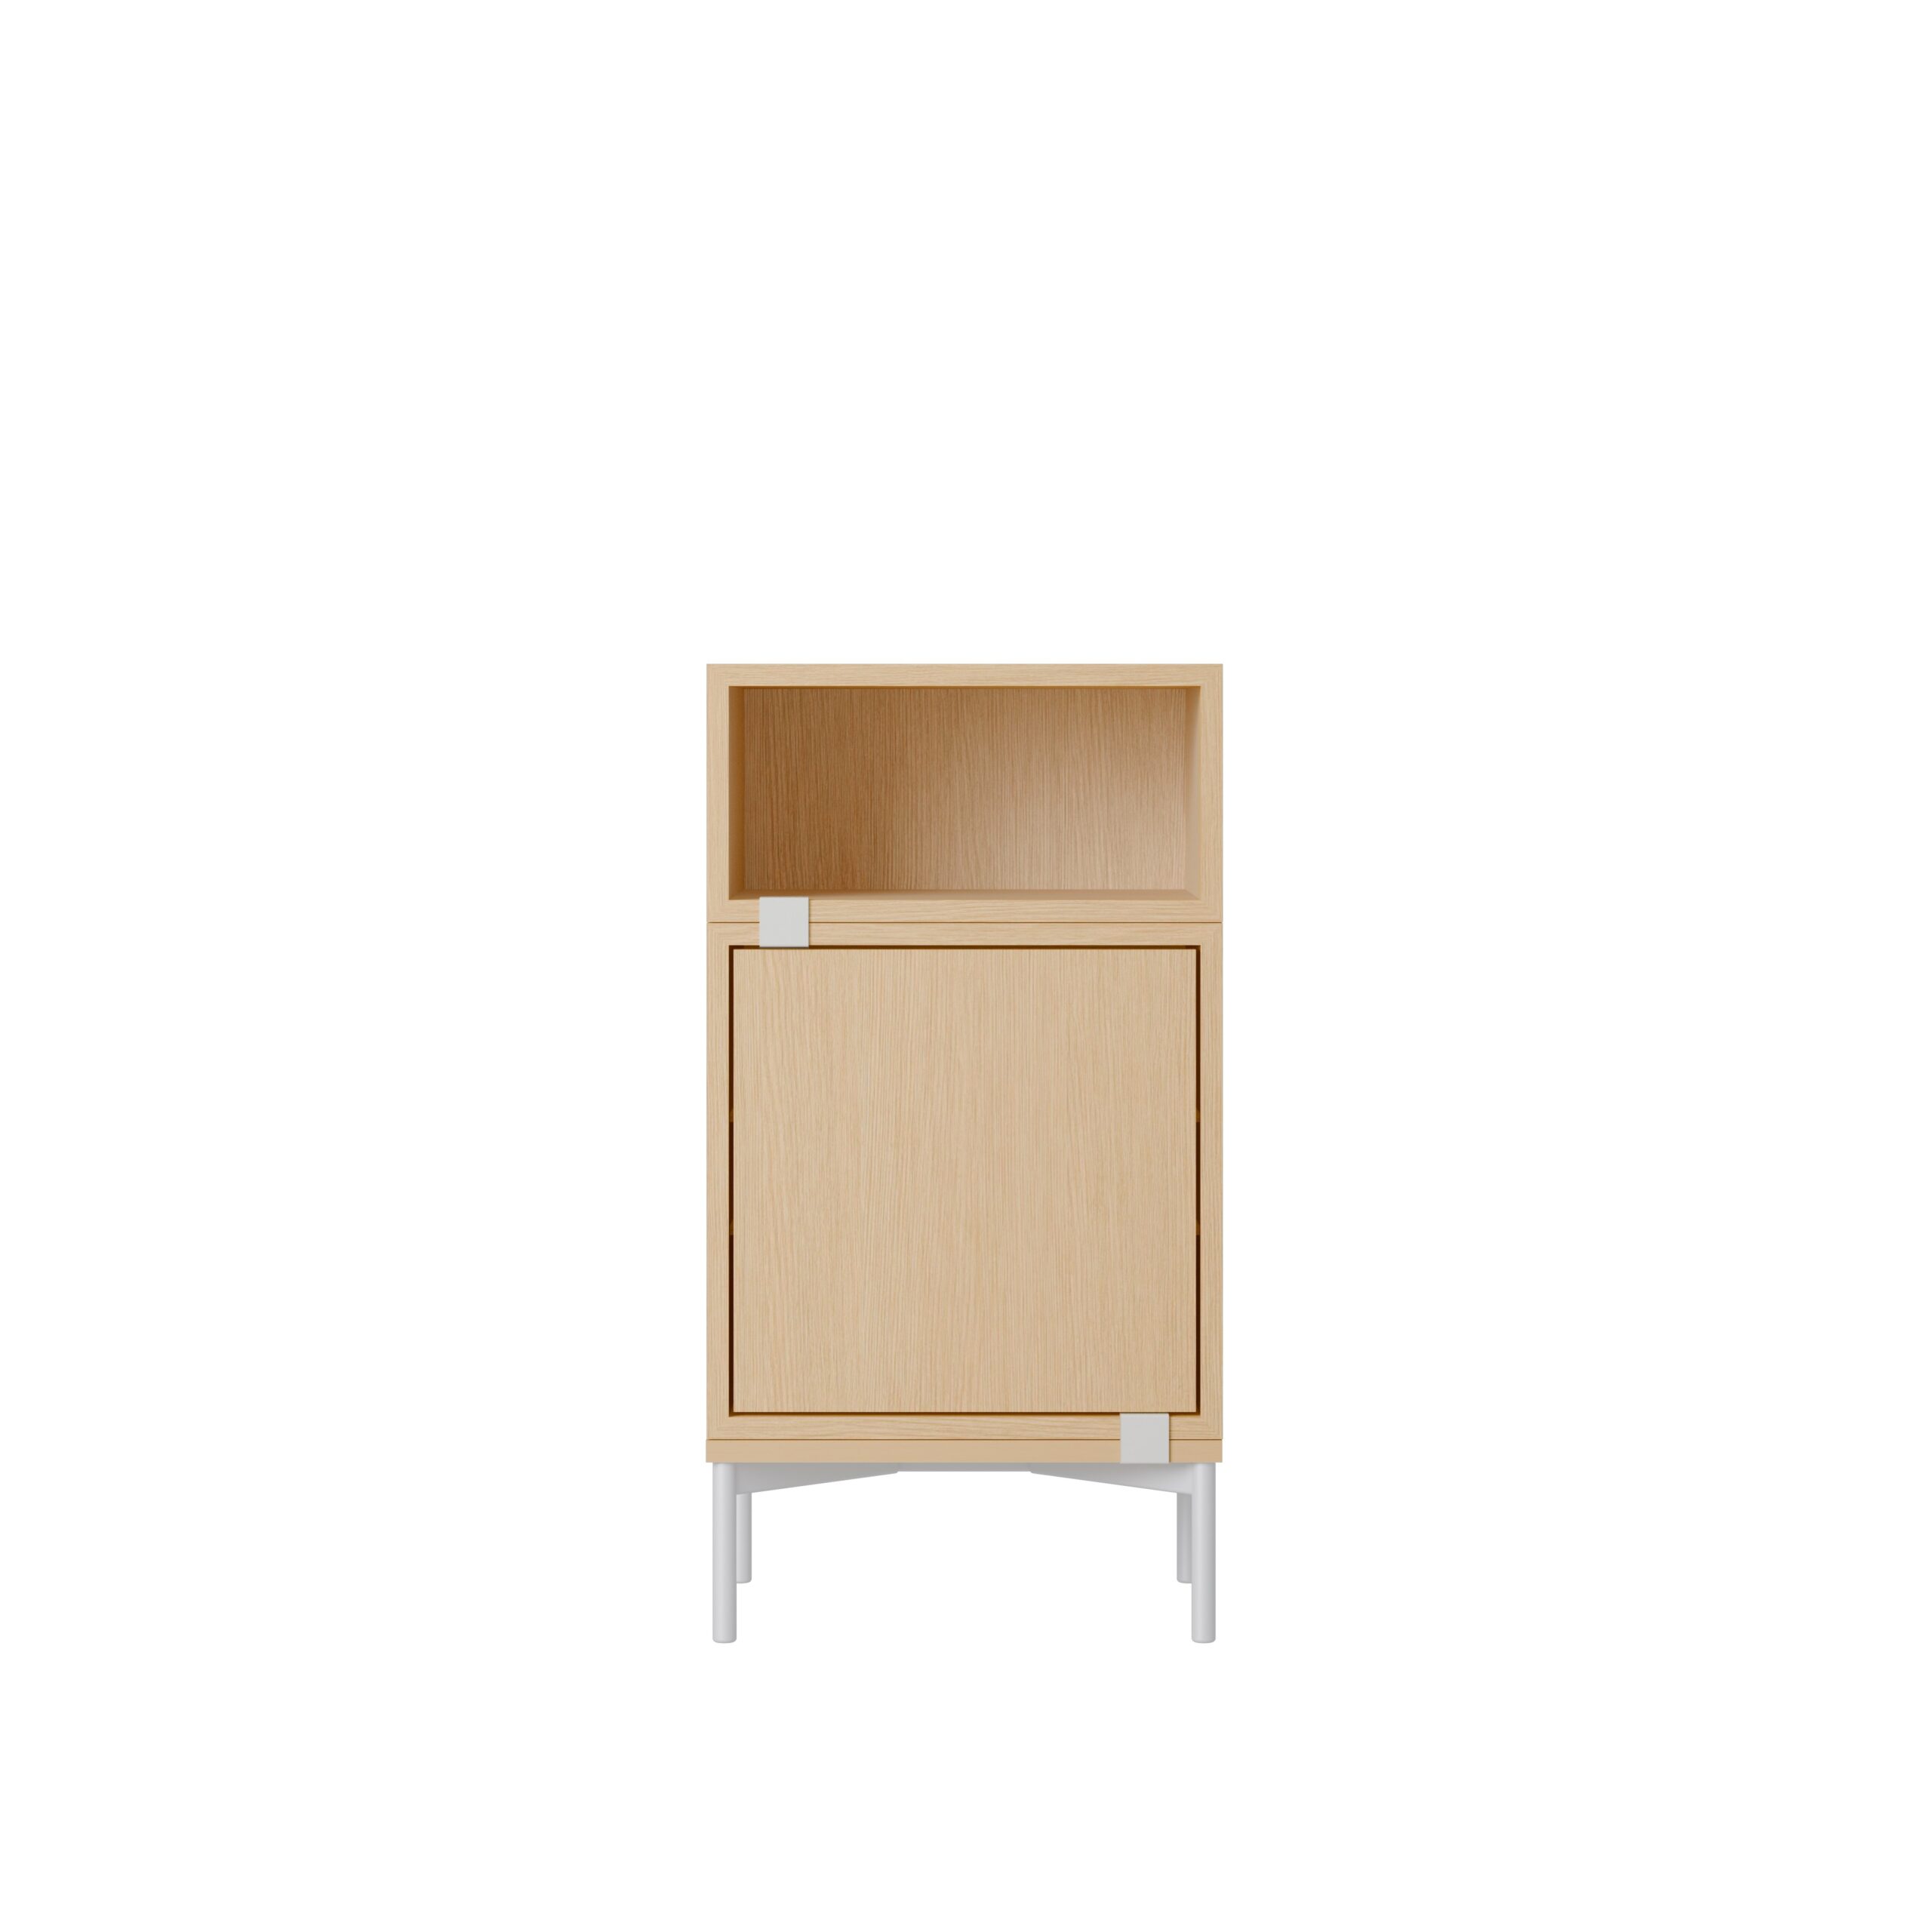 Stacked Storage Bedside Table Combination No 2